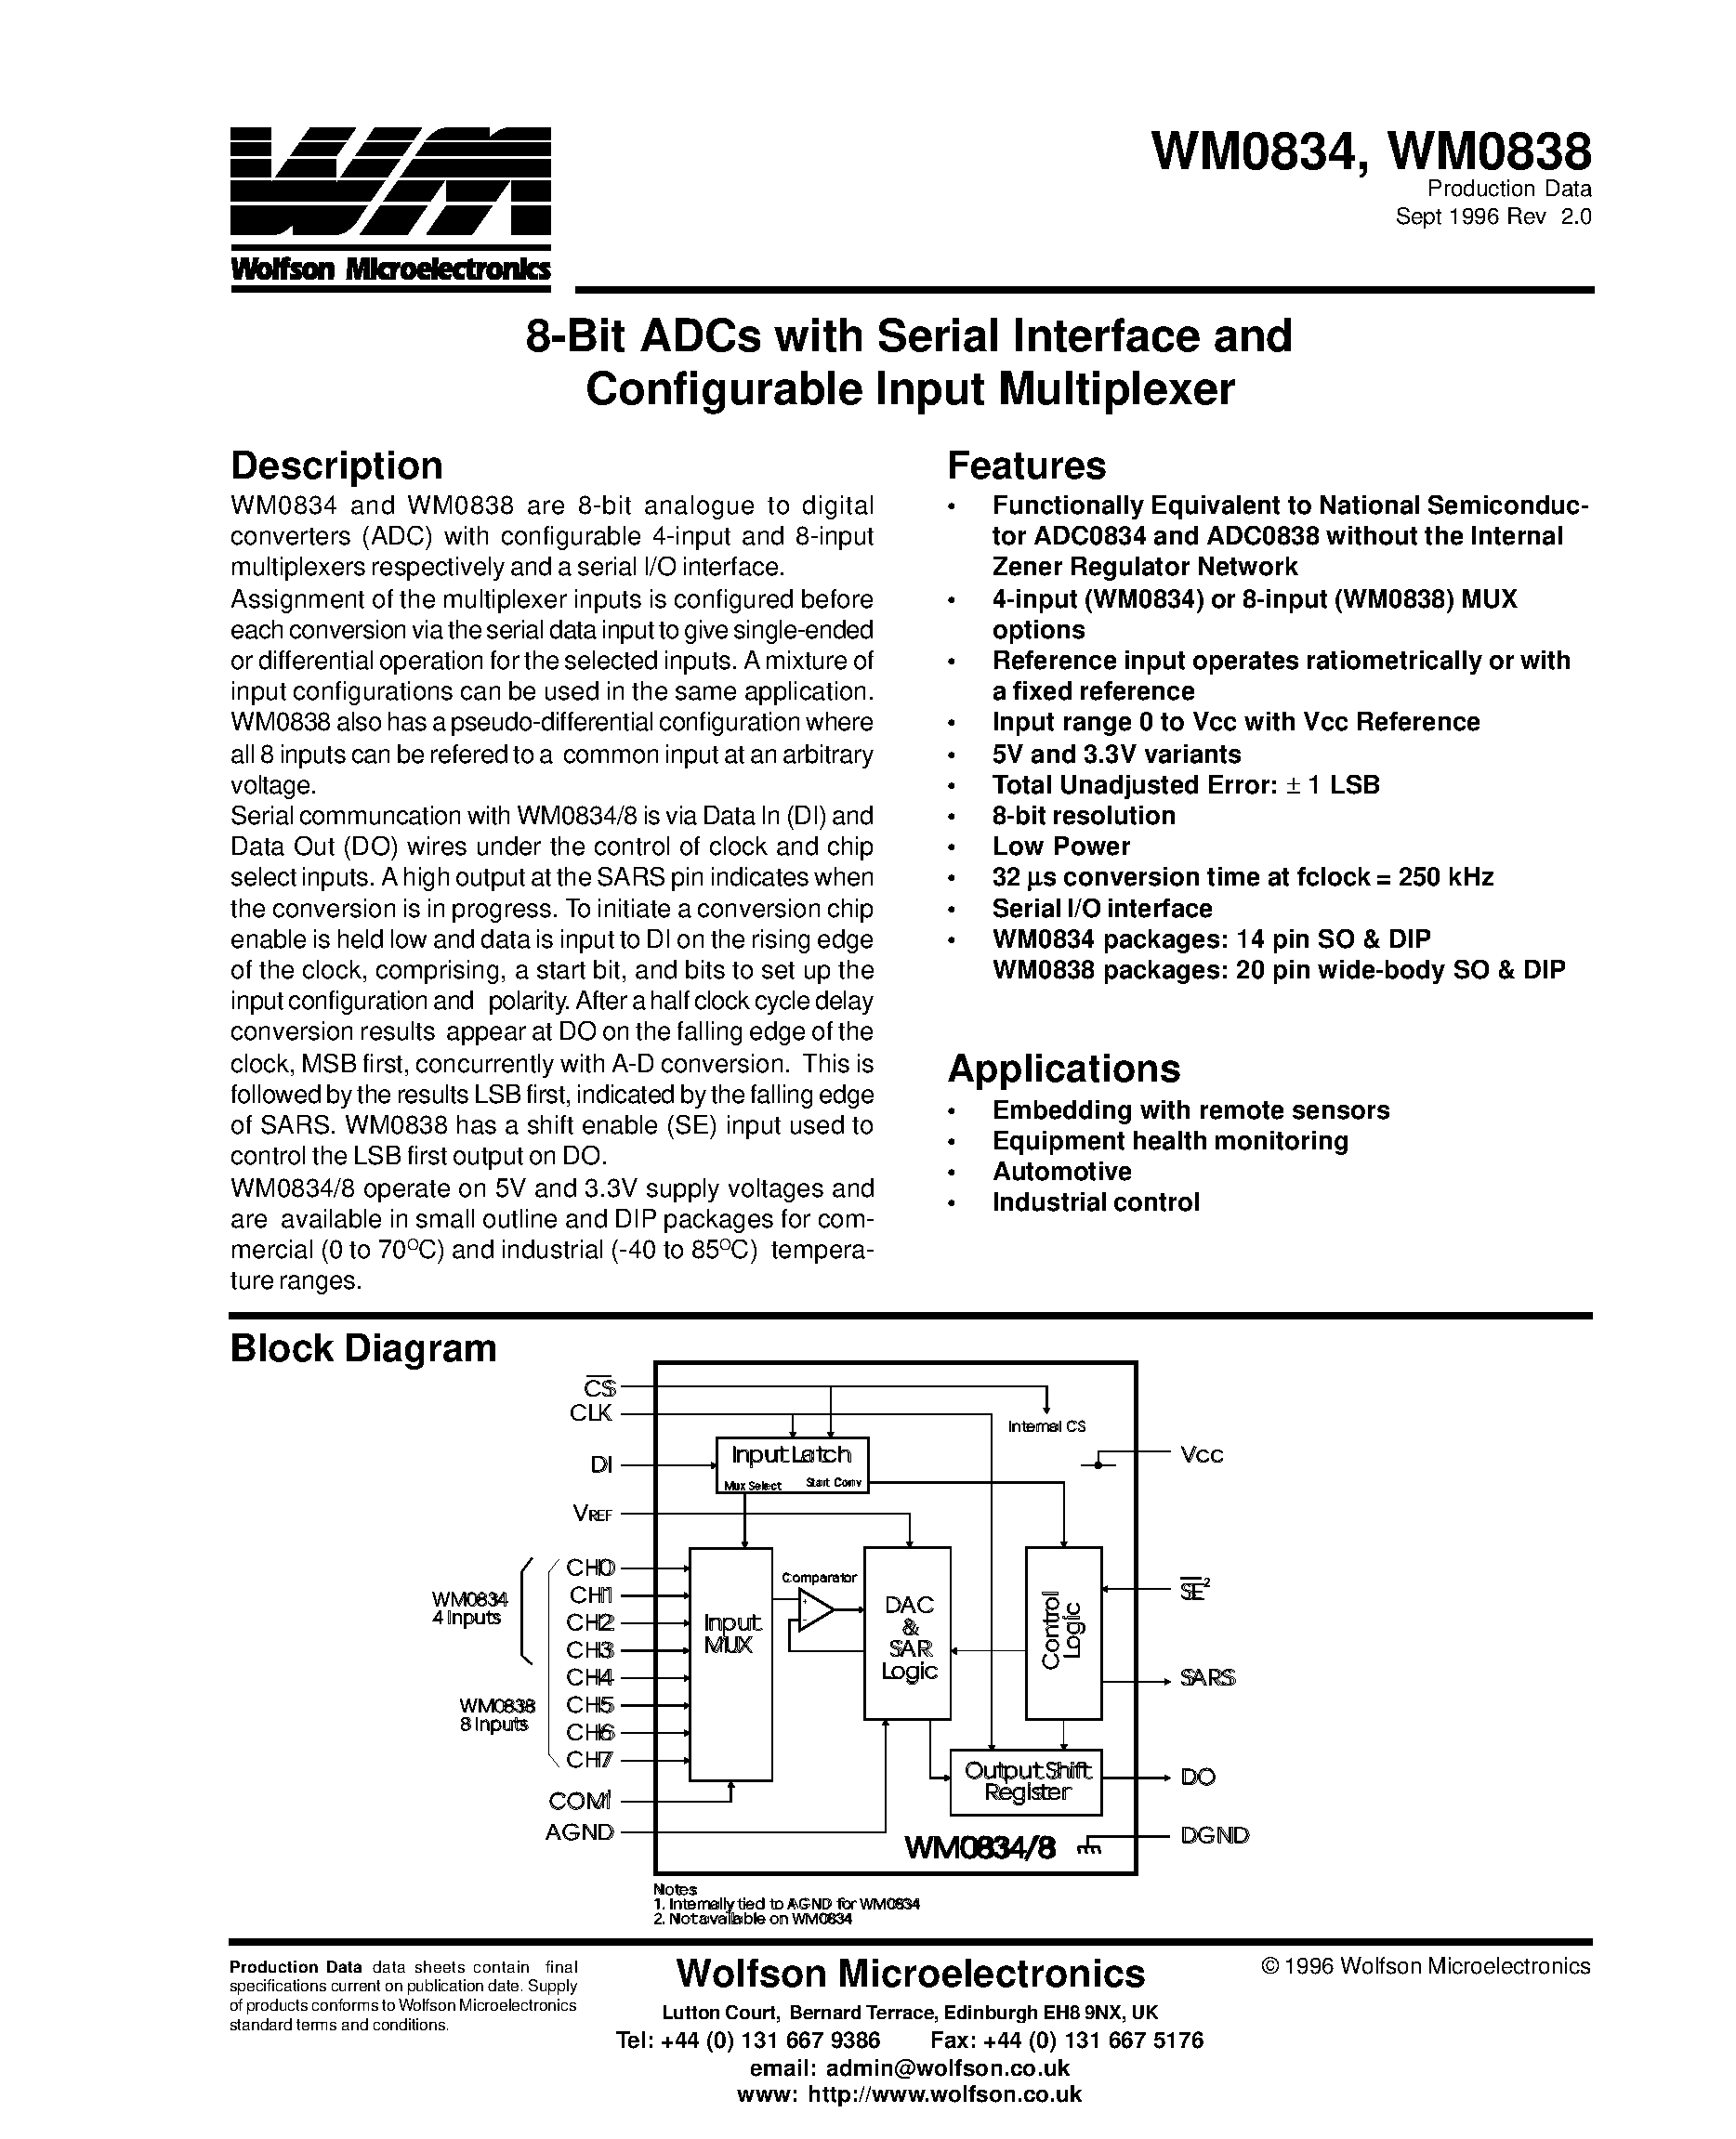 Datasheet WM0838 - 8-Bit ADCs with Serial Interface and Configurable Input Multiplexer page 1